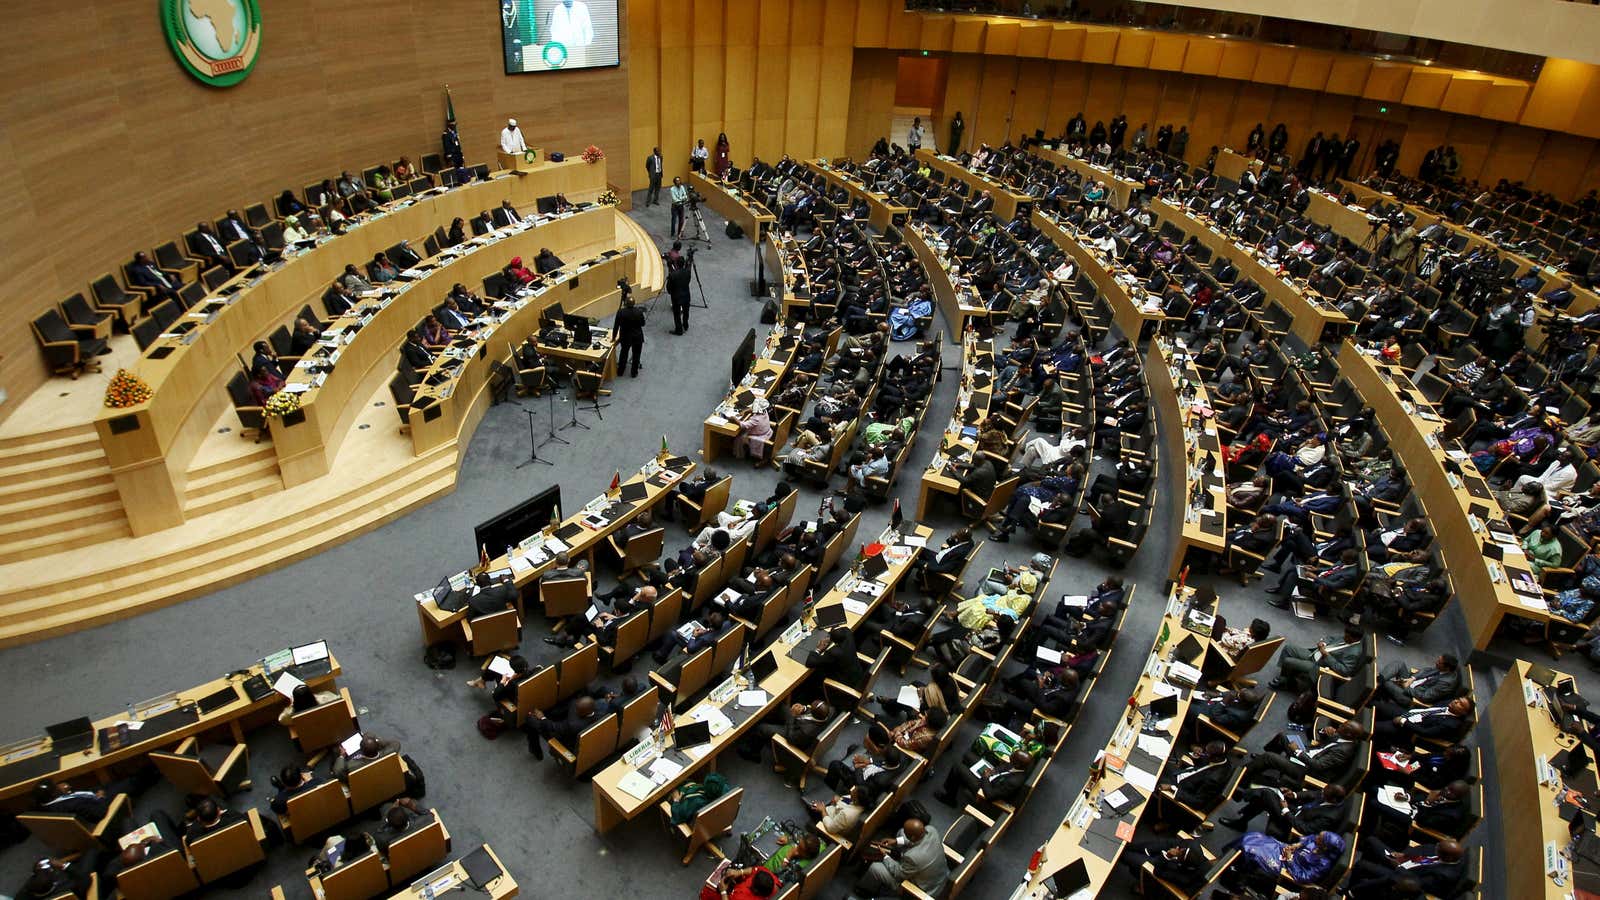 The African Union headquarters in Ethiopia’s capital Addis Ababa.